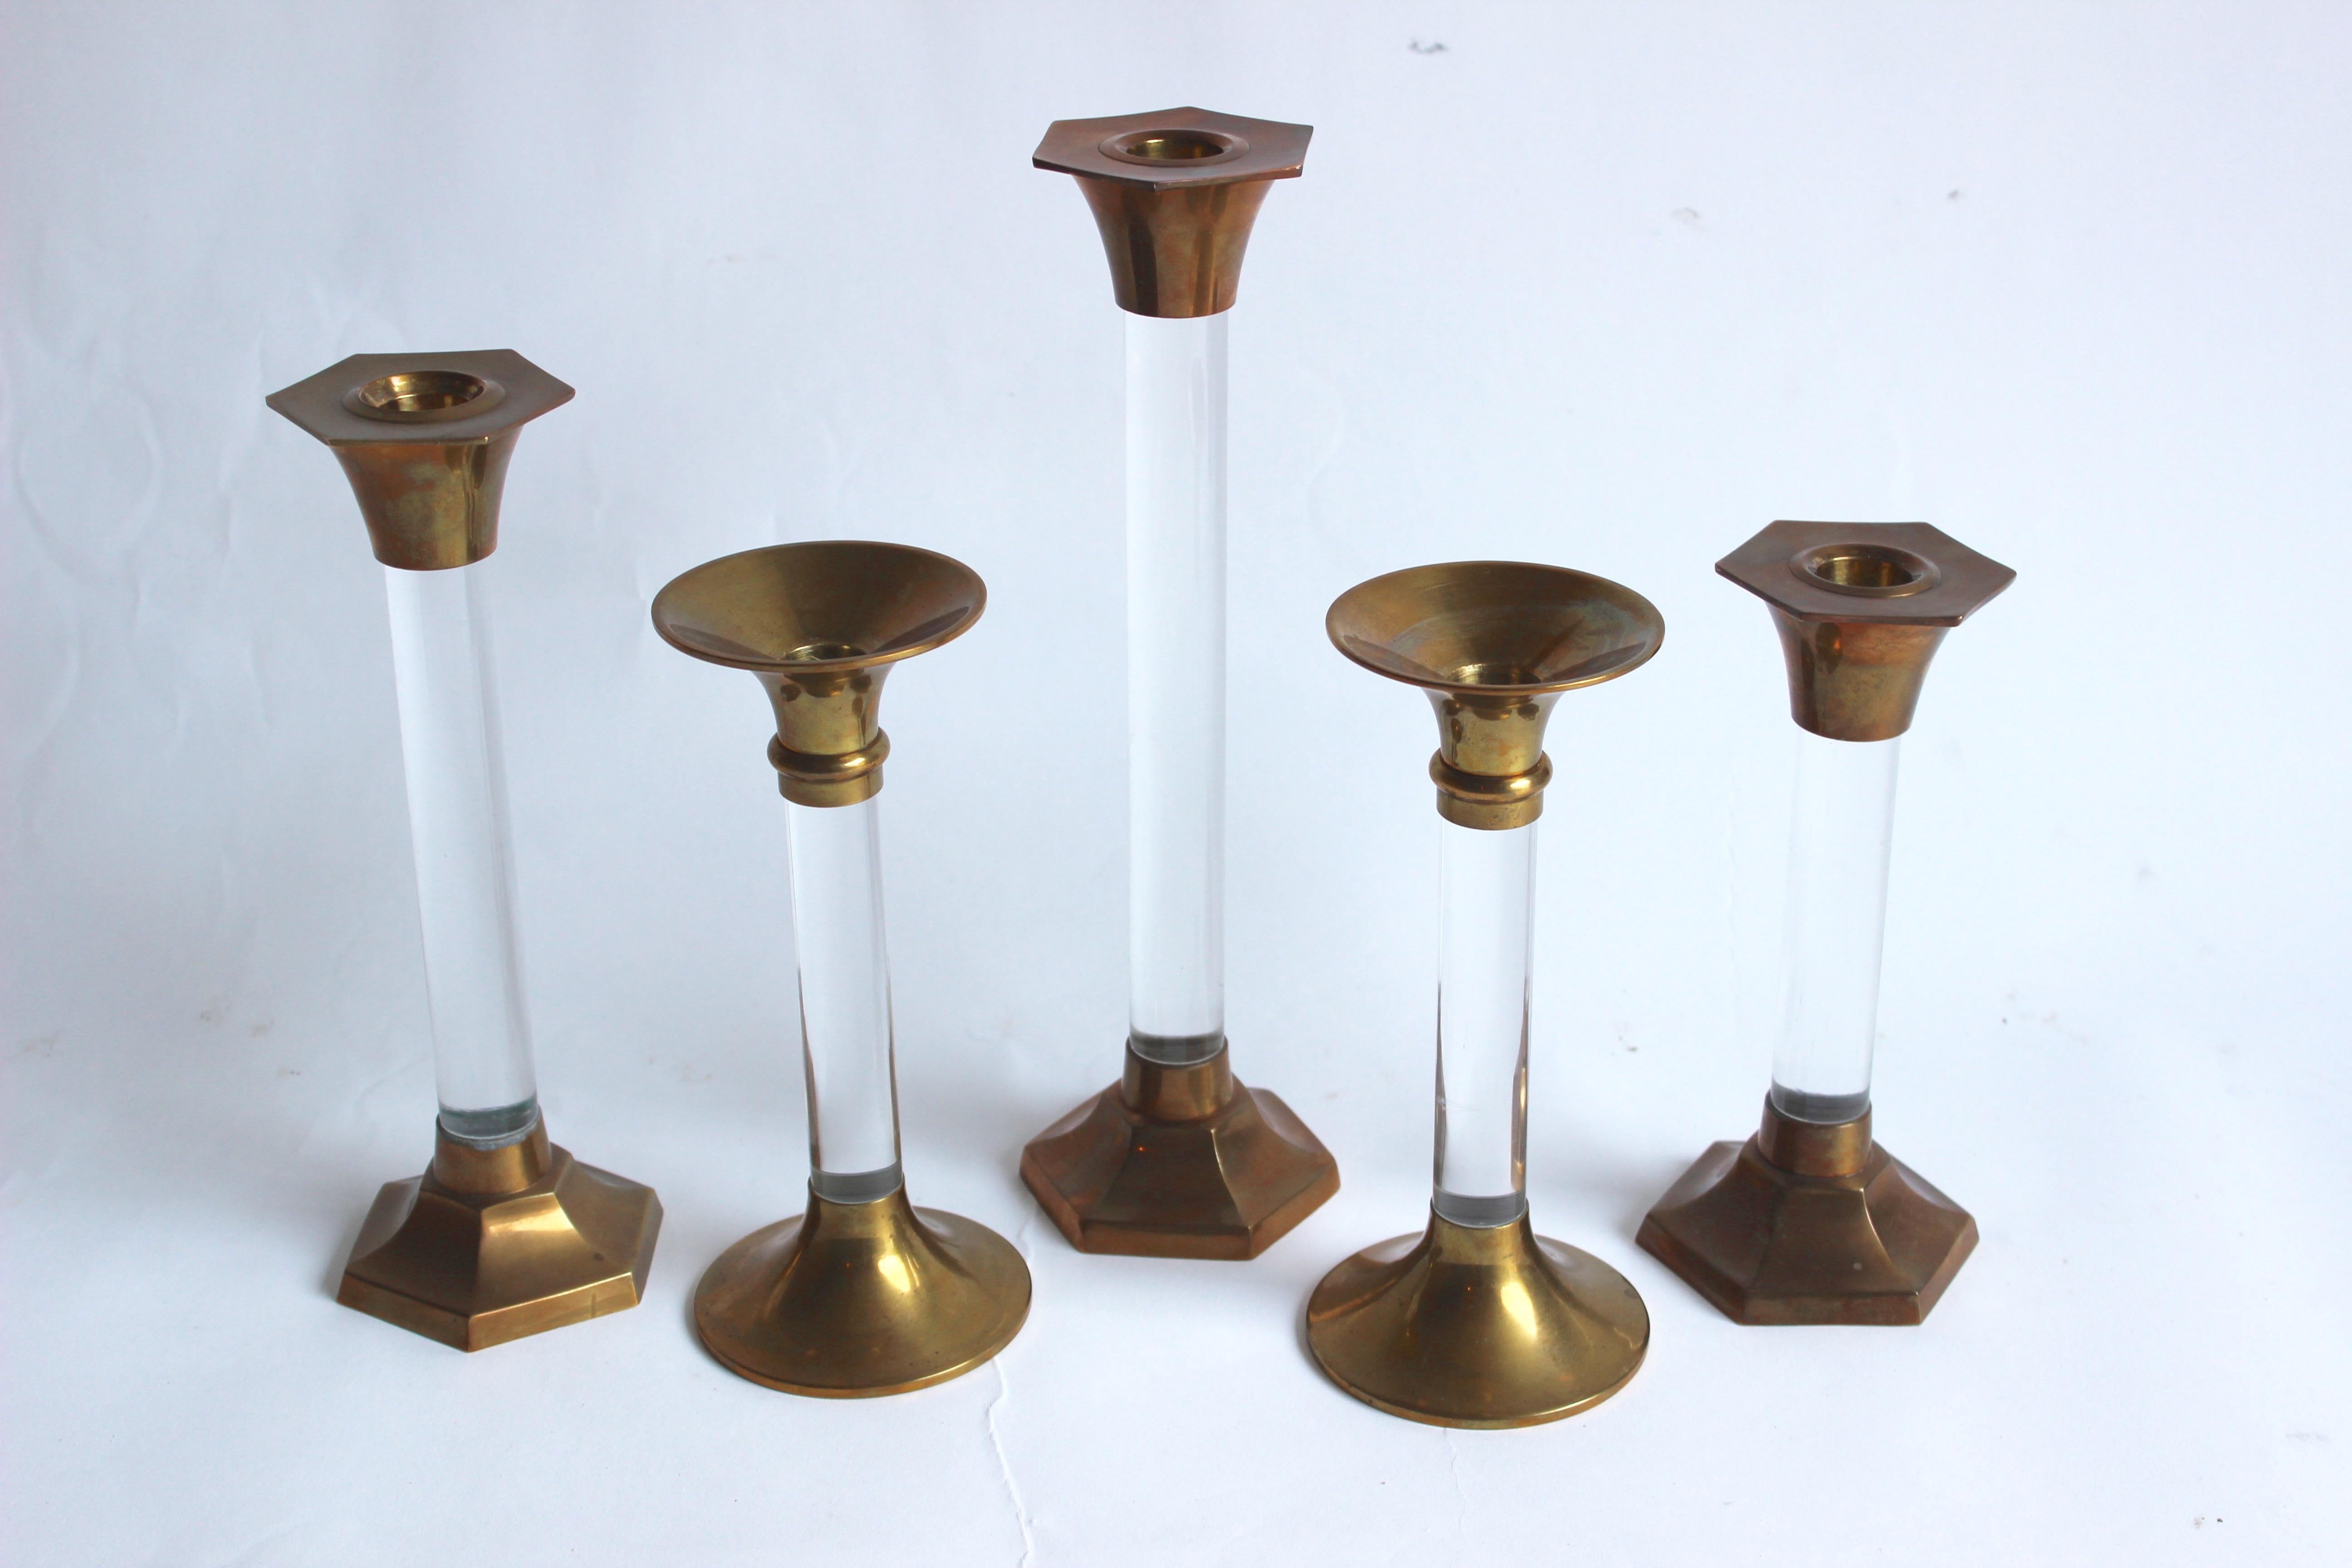 Set of five brass and Lucite candlesticks.

Pair of round candlesticks 8